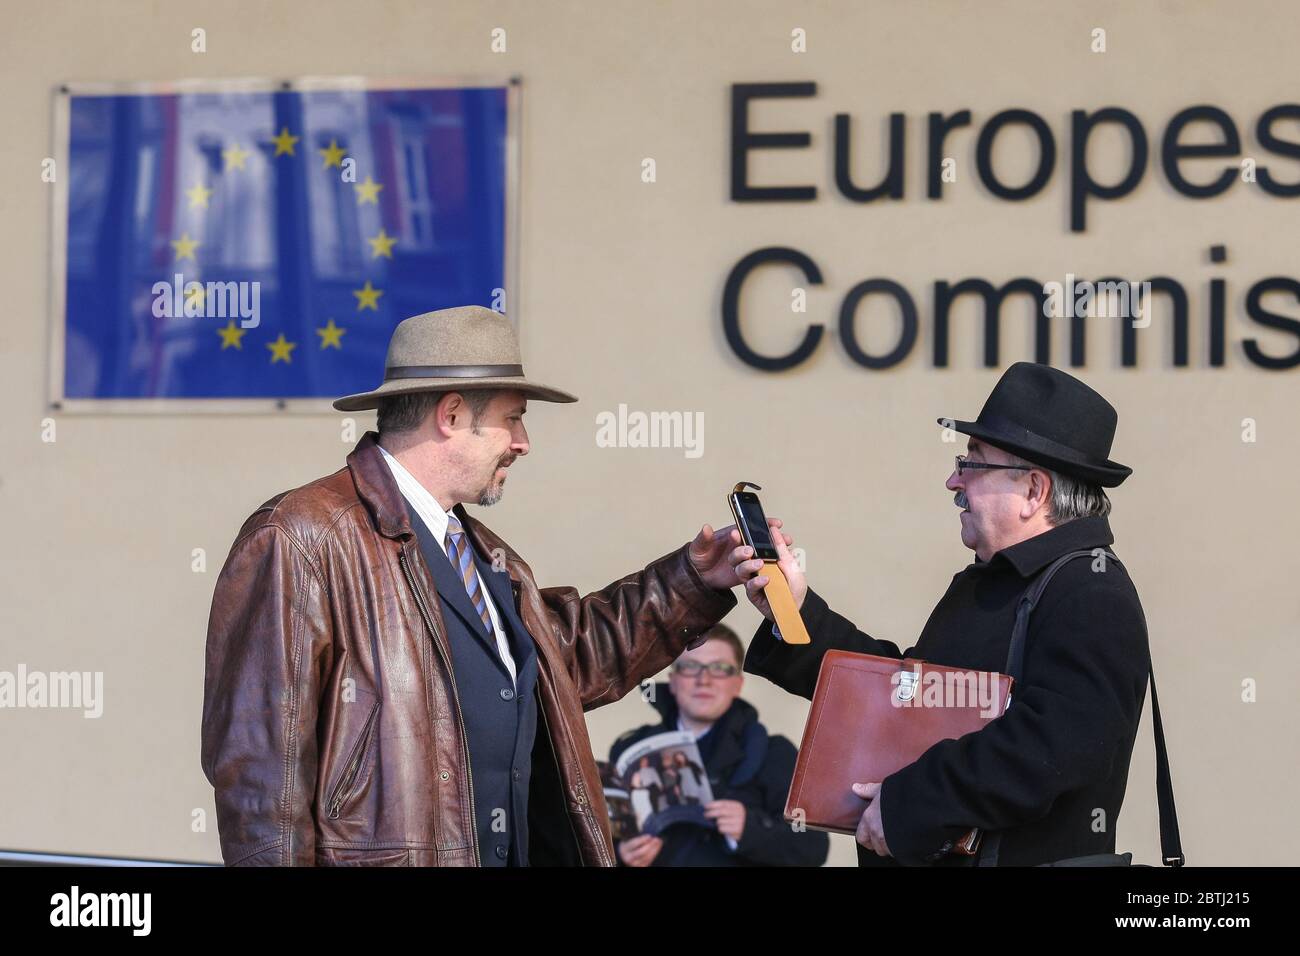 People communicate near the European Commission building. Brussels, Belgium - 02 Mar 2011 Stock Photo